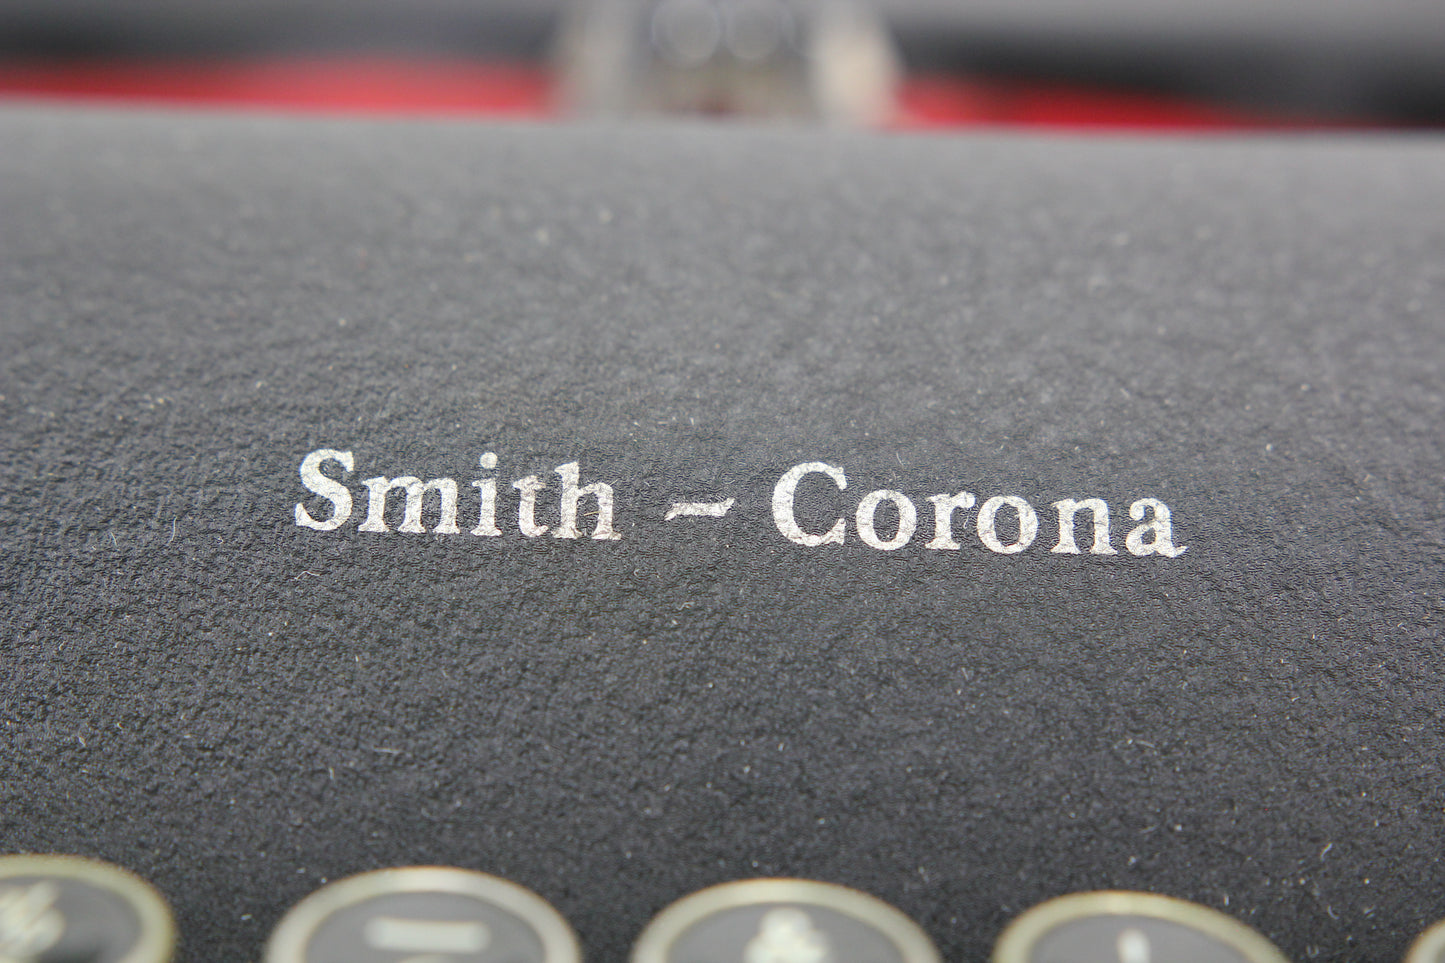 Smith Corona Clipper Portable Typewriter with Case, Made in USA, 1946